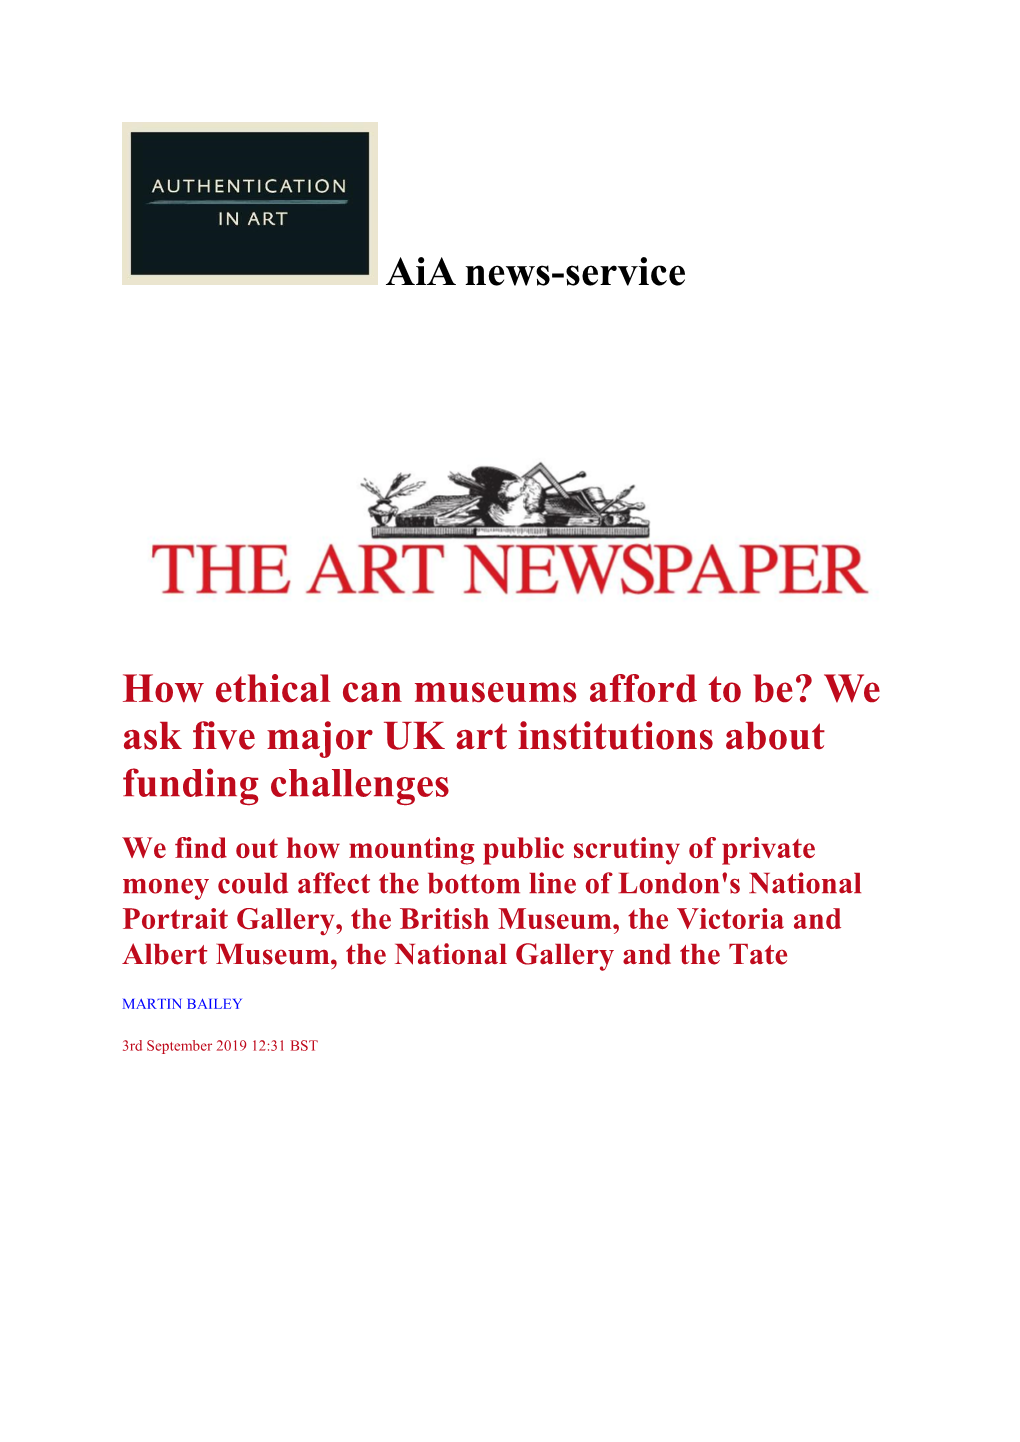 Aia News-Service How Ethical Can Museums Afford to Be? We Ask Five